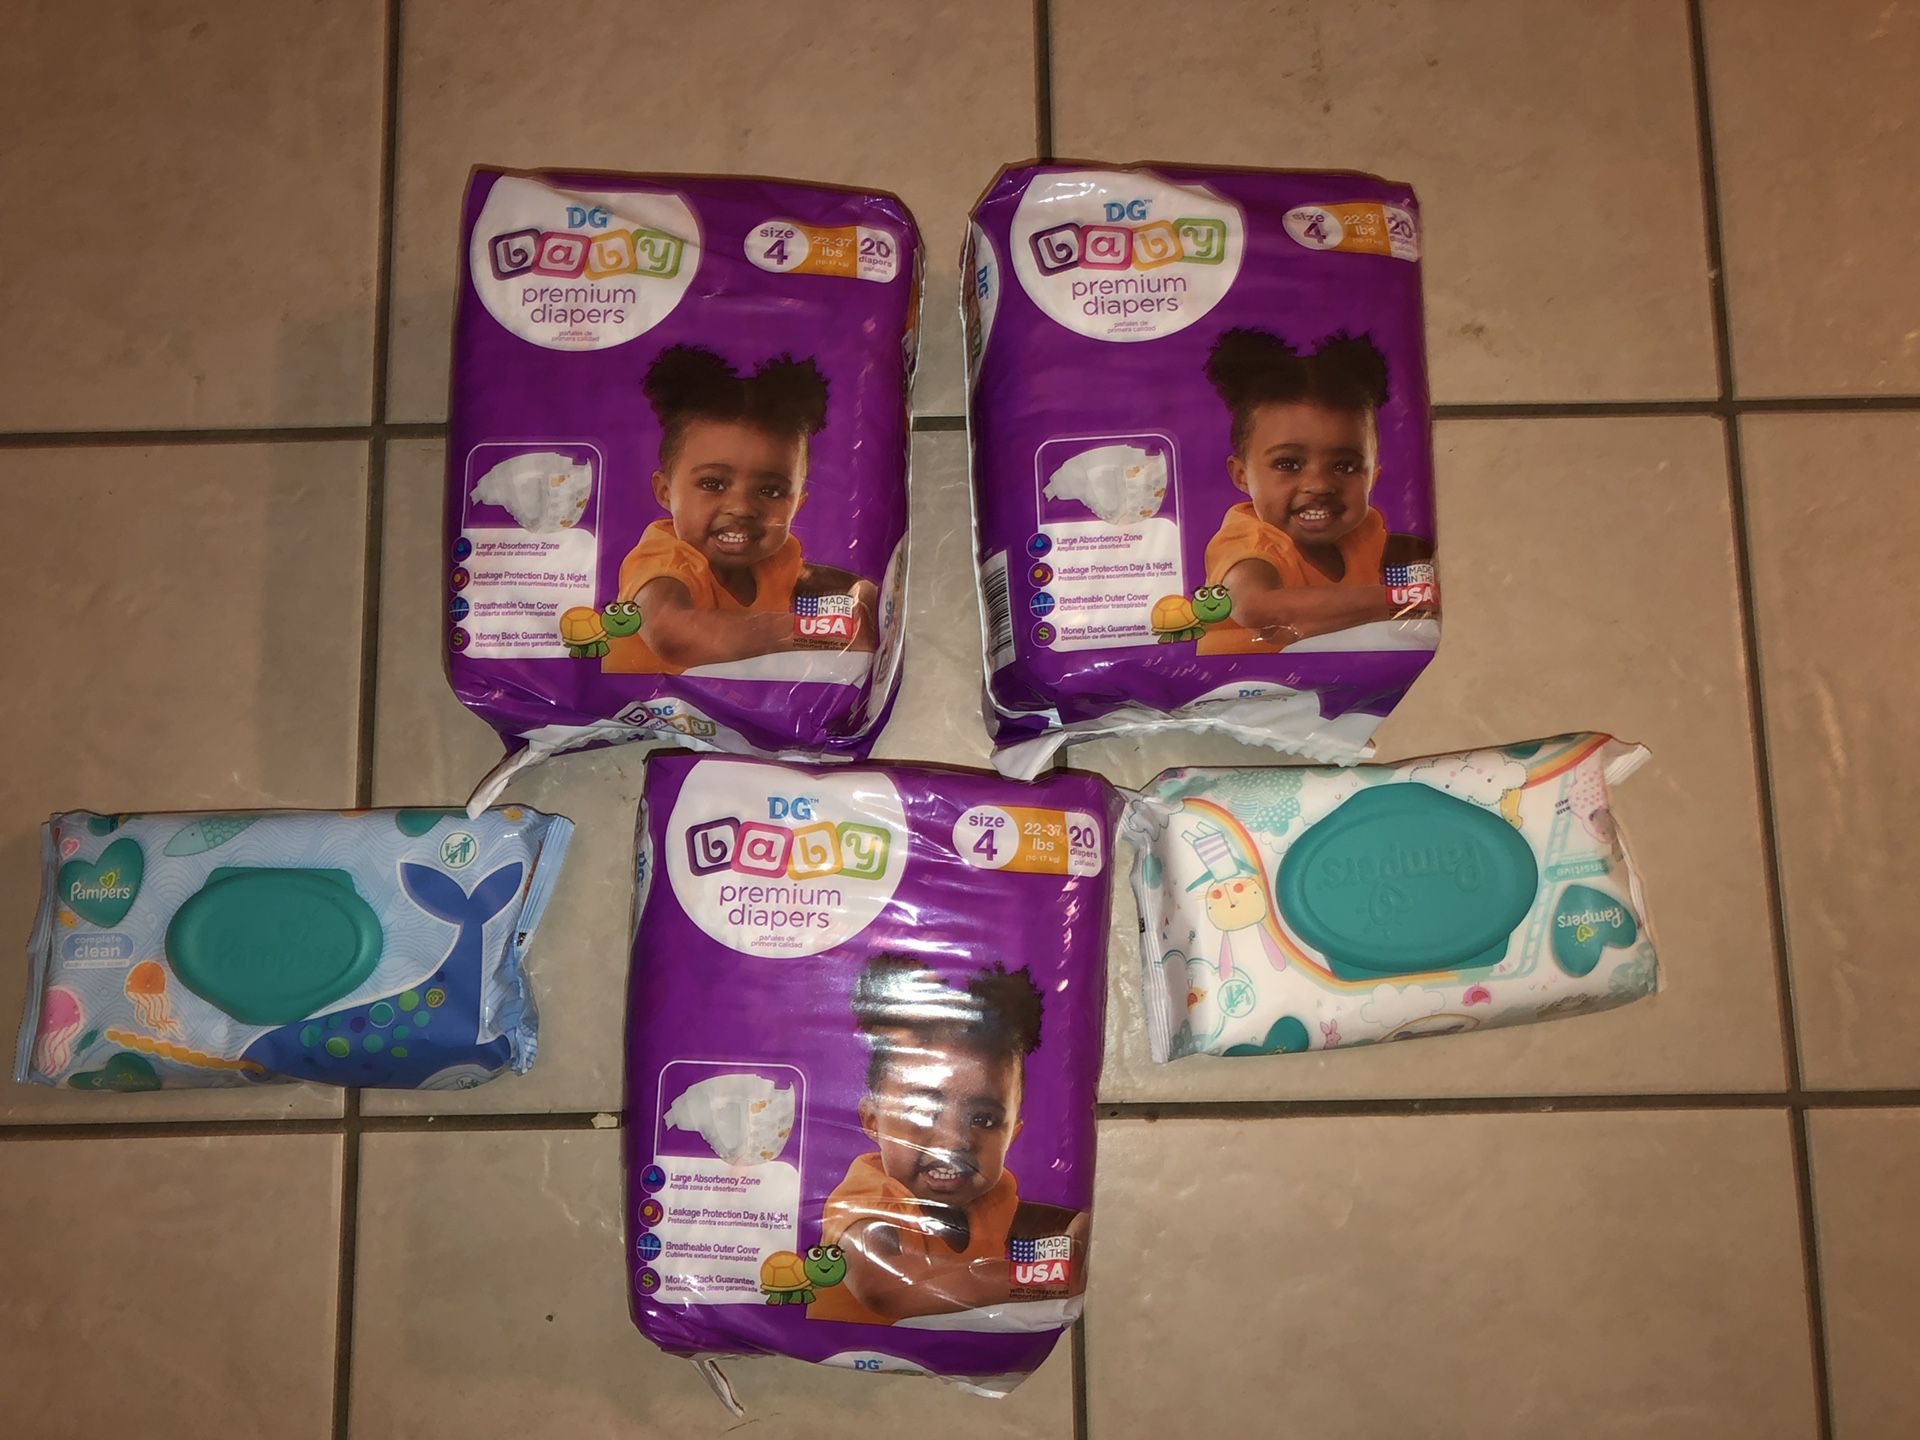 Baby diapers and pamper wipes